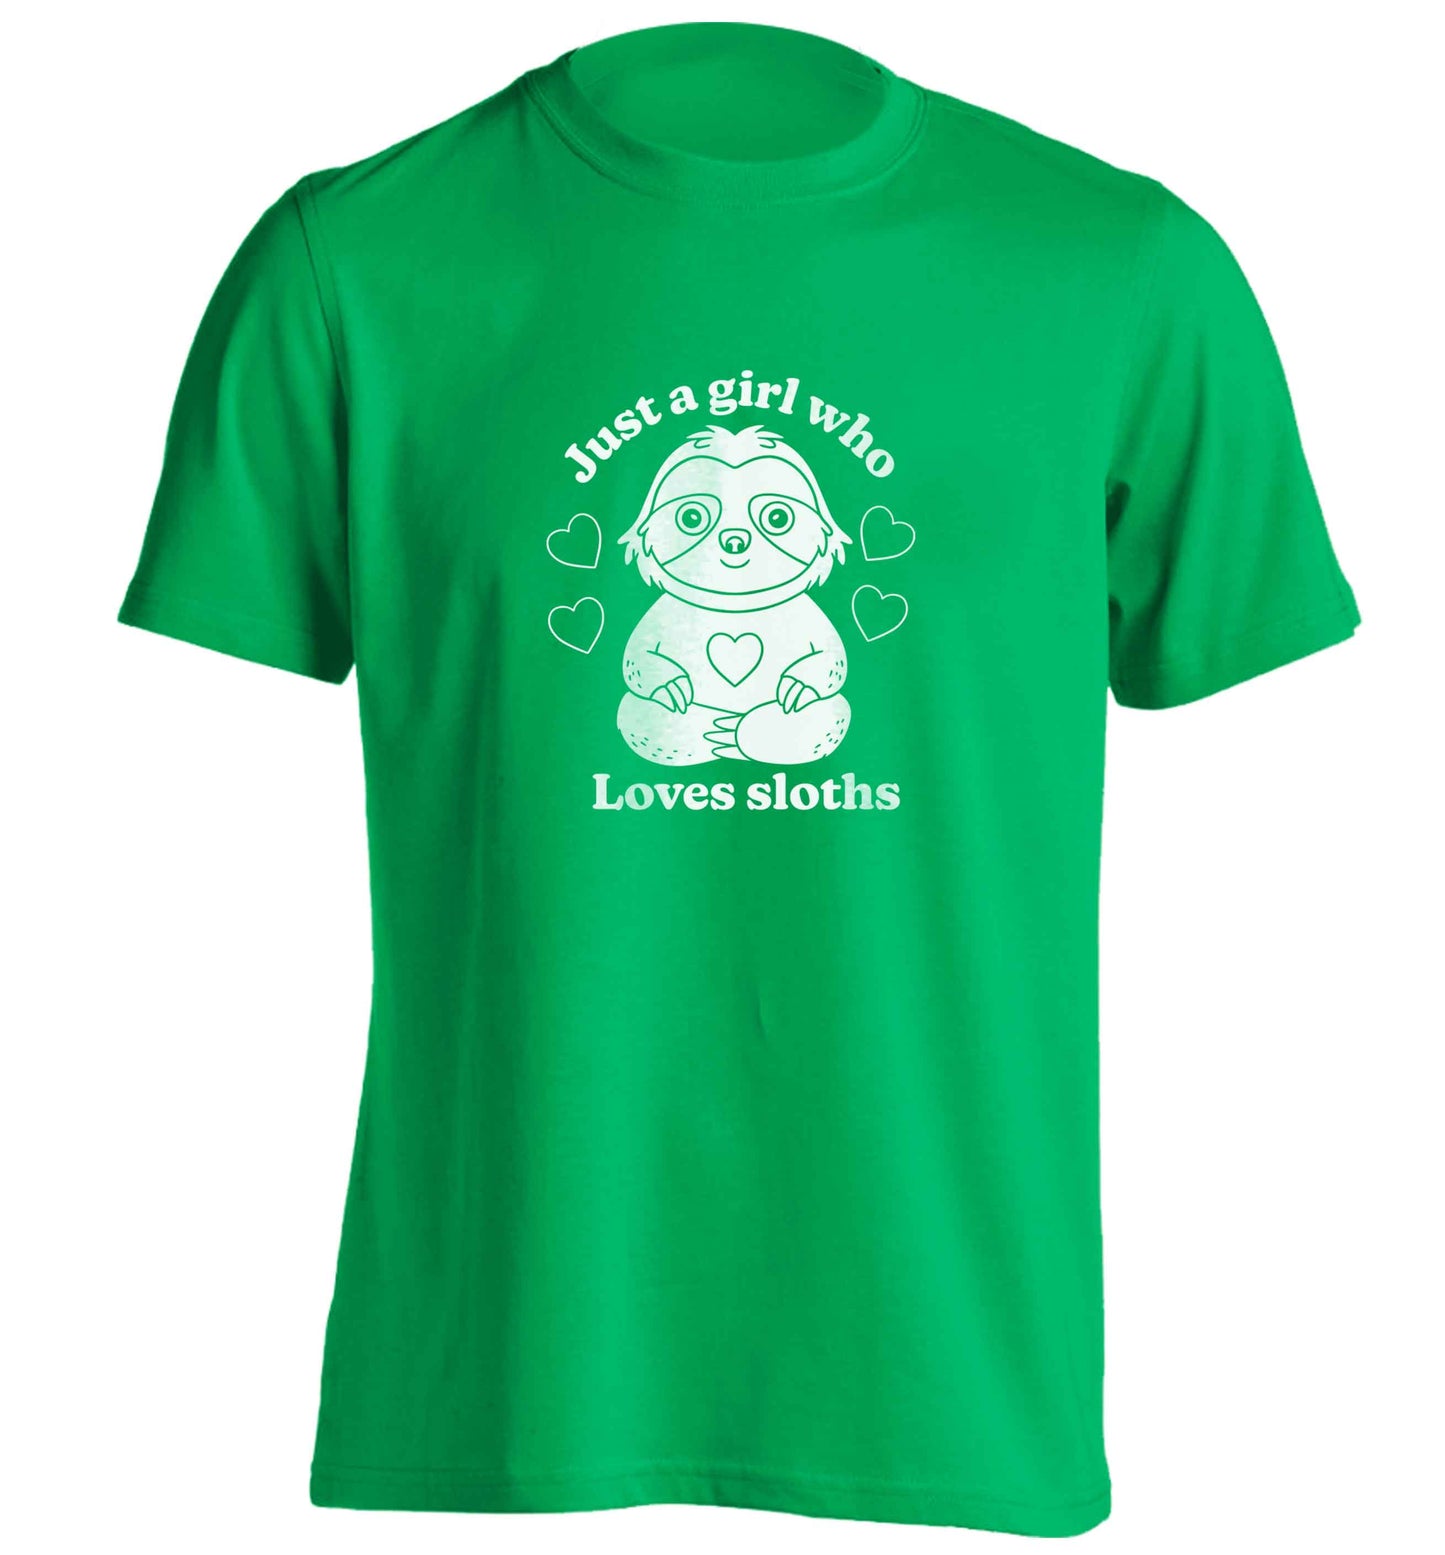 Just a girl who loves sloths adults unisex green Tshirt 2XL